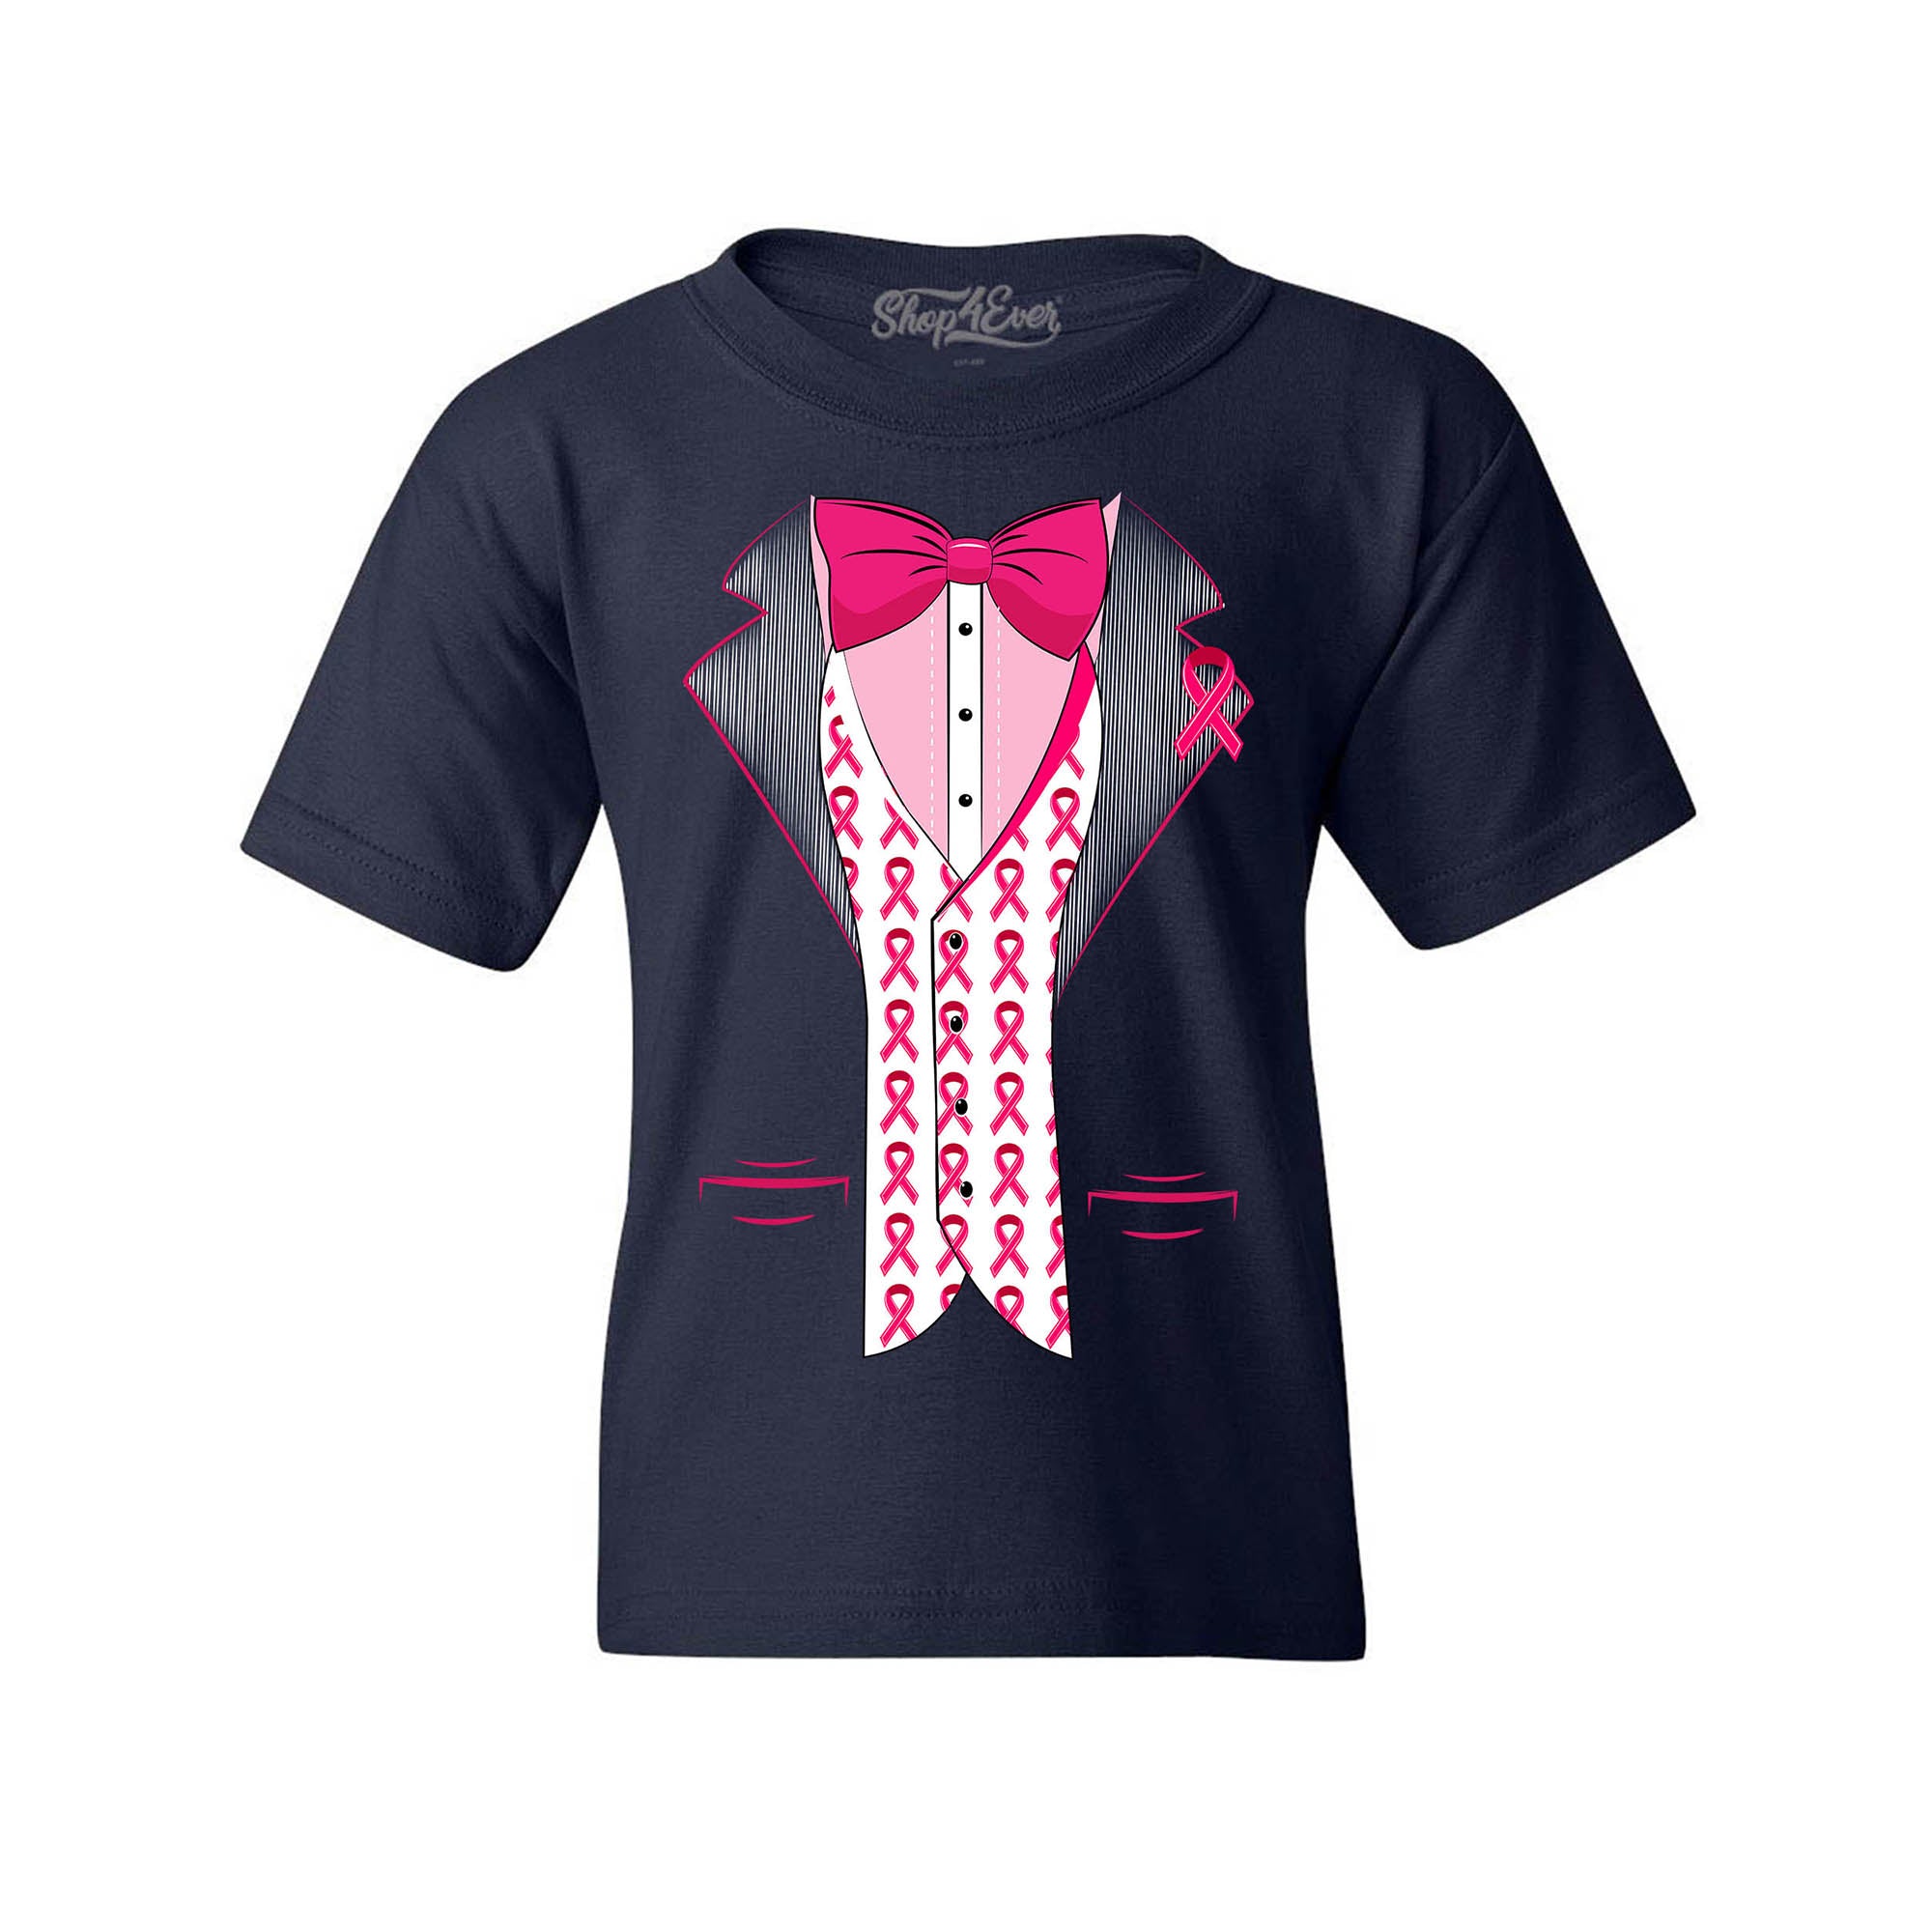 Breast Cancer Tuxedo Youth's T-Shirt Support Awareness Child's Tee